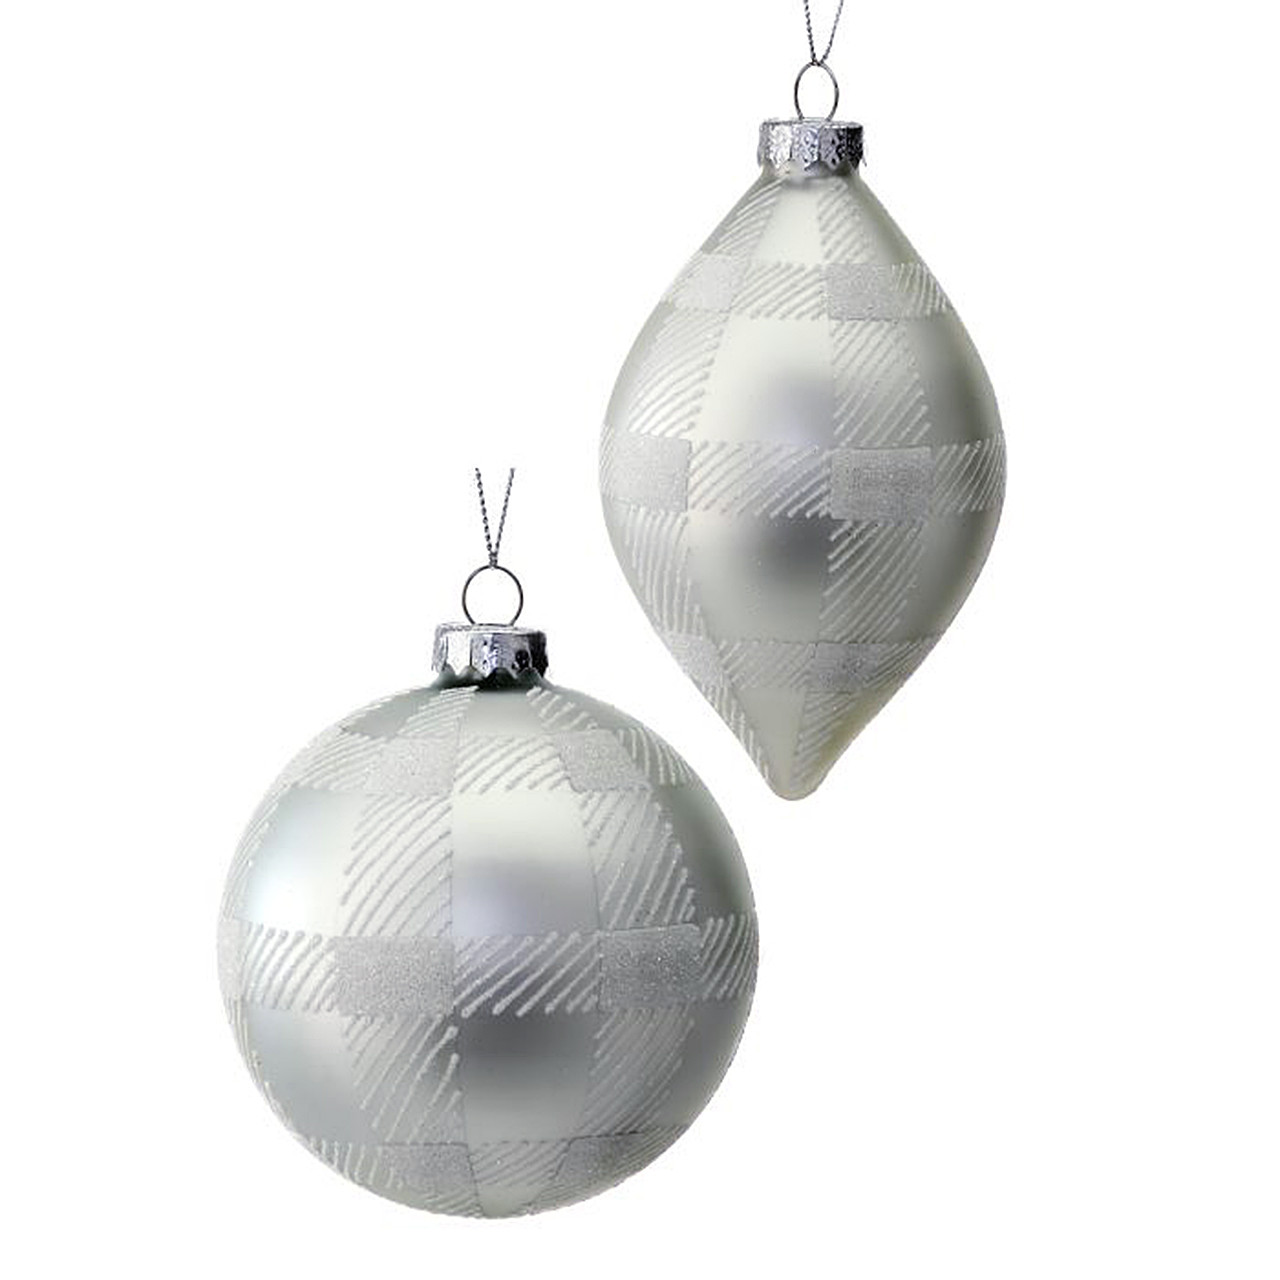 In-Store Only - 4.5 in. Silver Glass Check Ball and Finial Ornament Individual Option